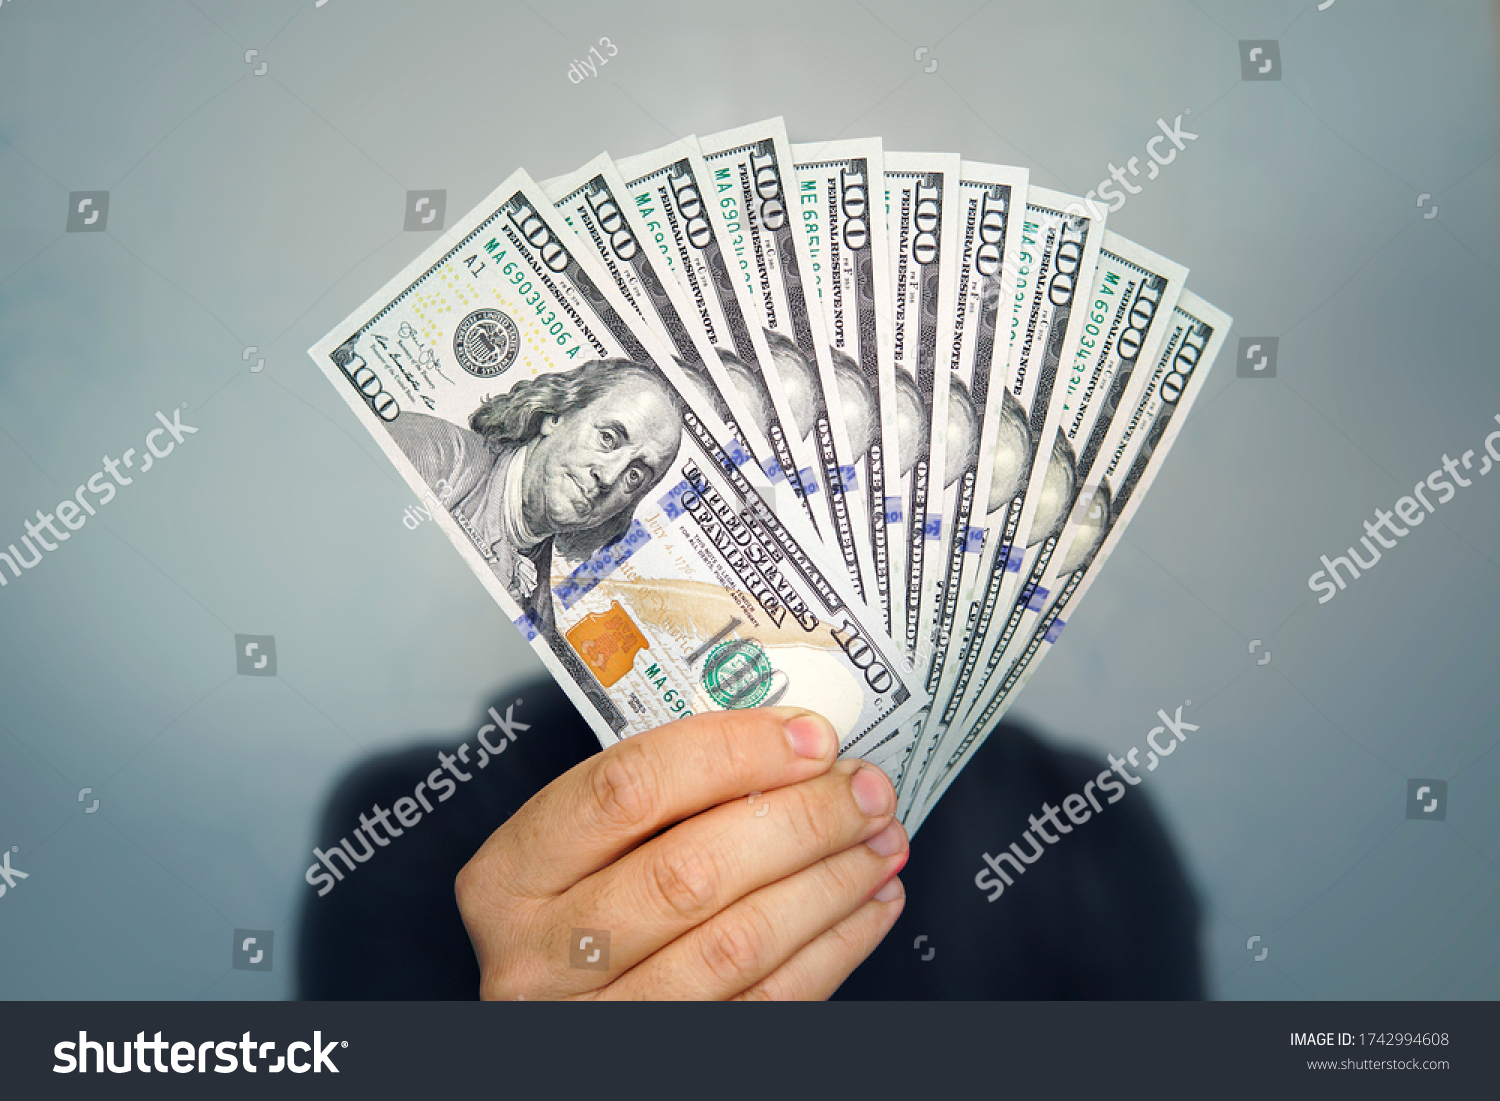 Hands holding dollar cash. 1000 dollars in 100 bills in a man's hand close-up on a dark background. #1742994608